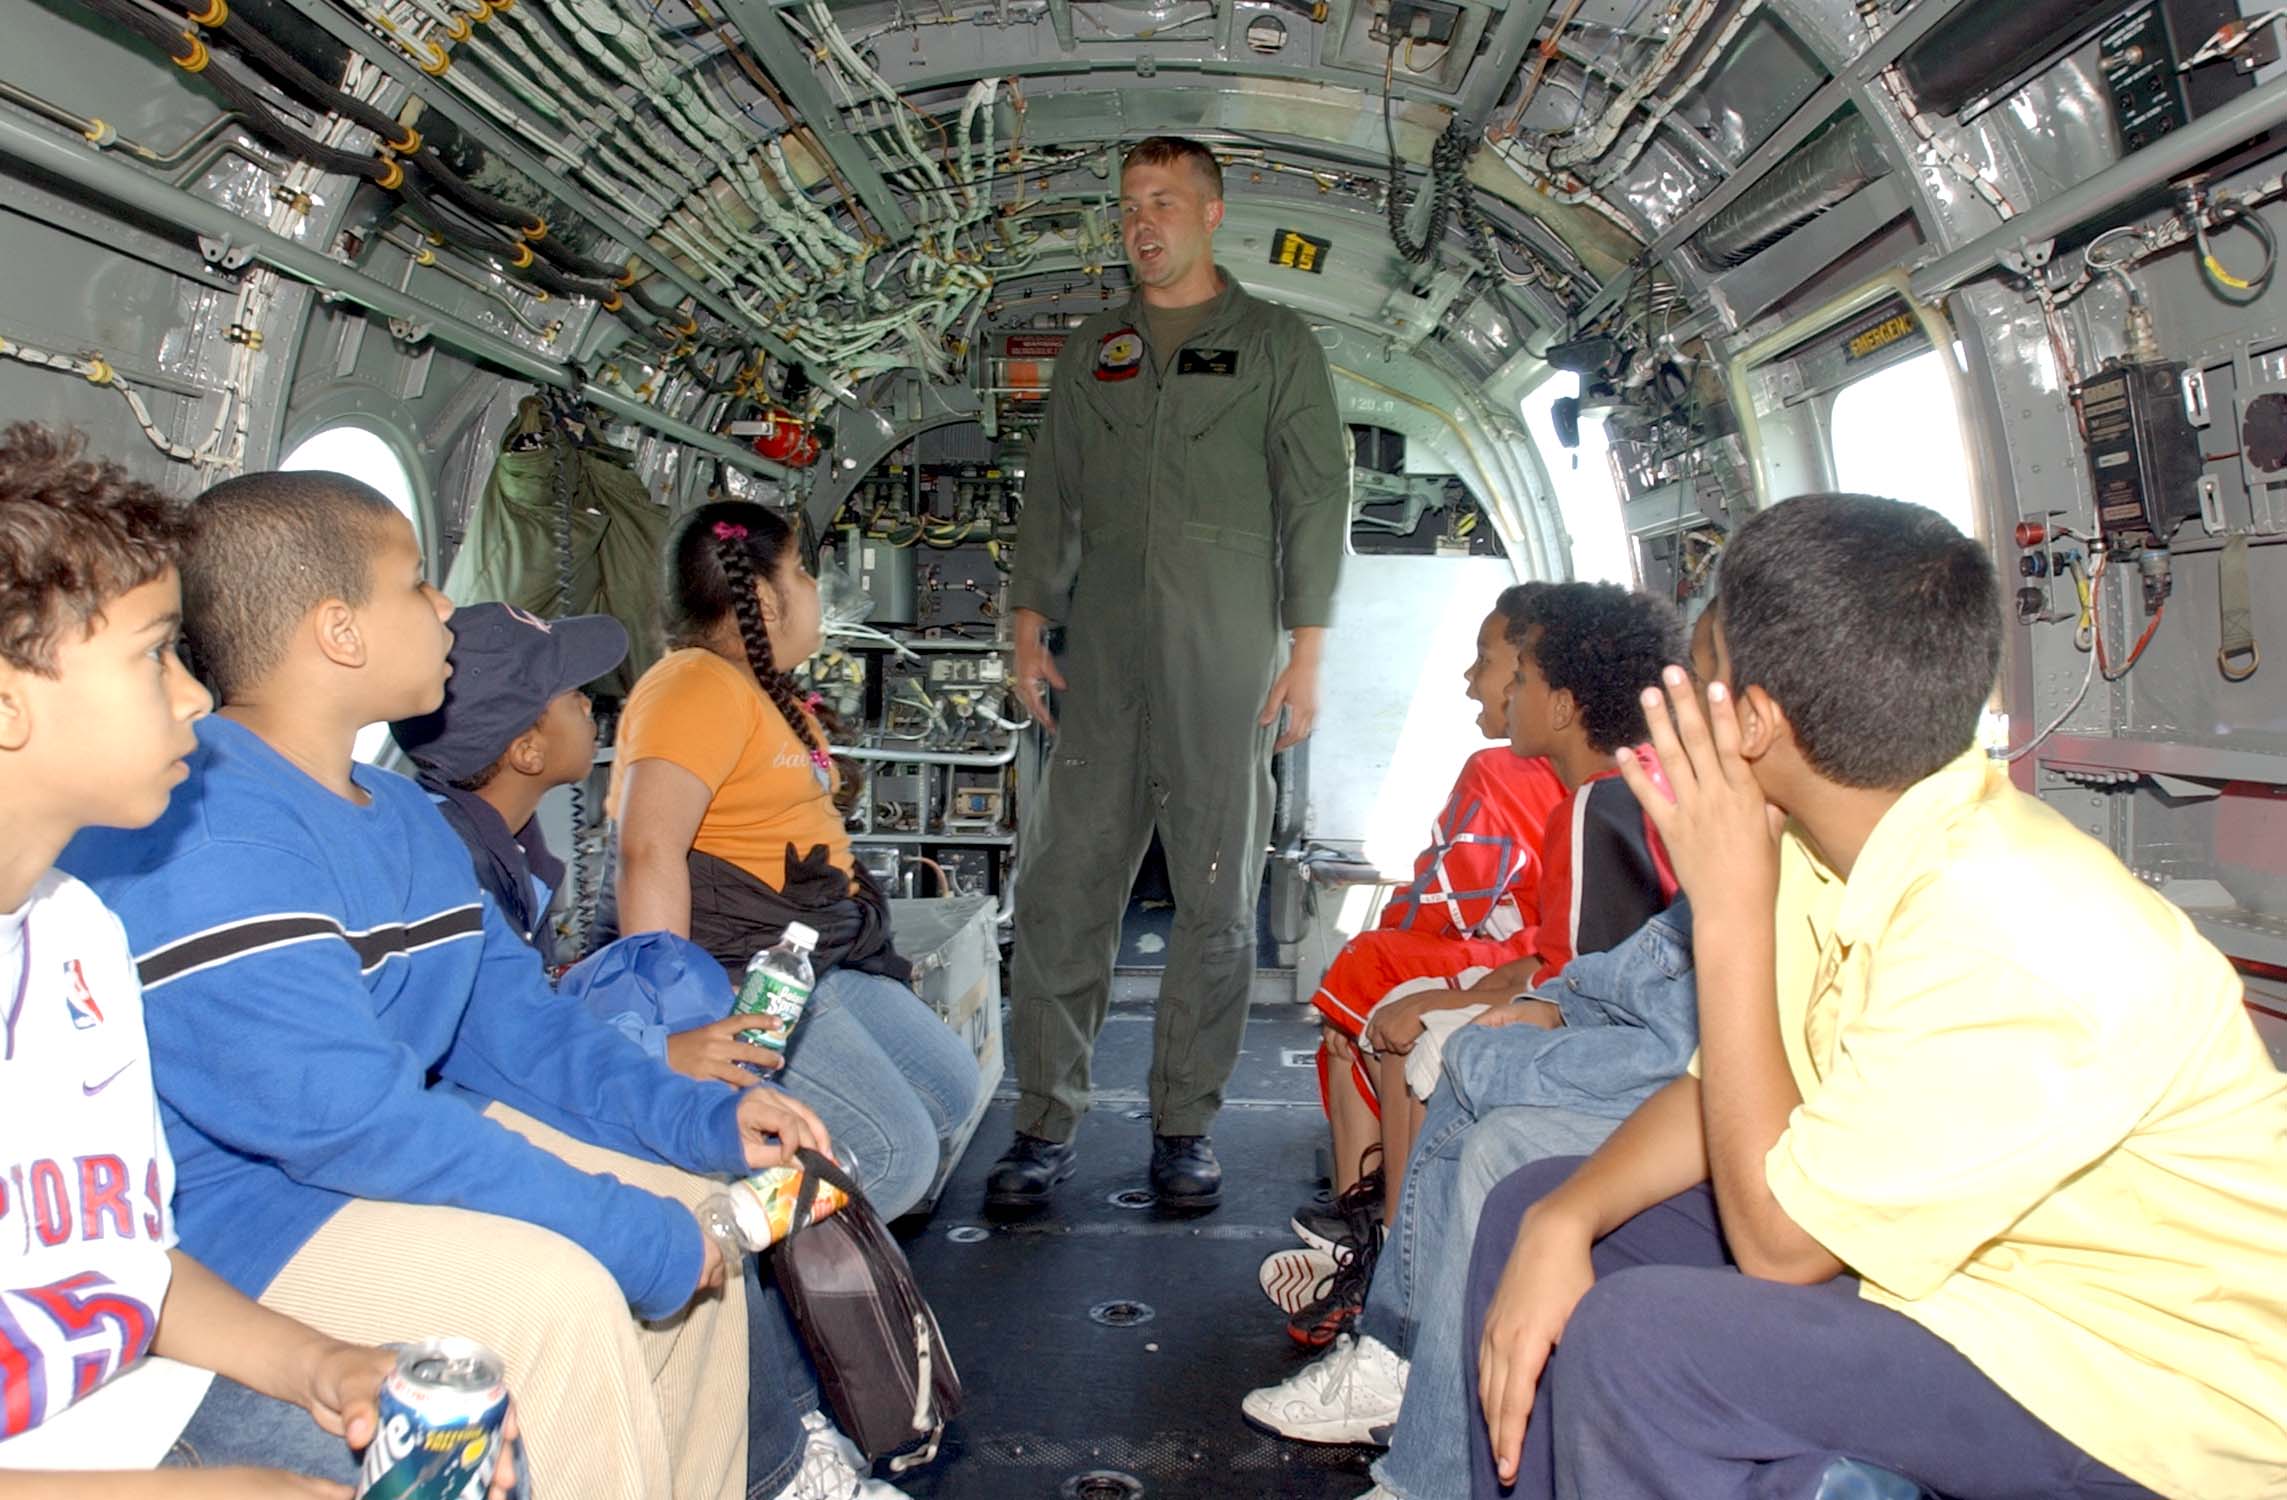 US Navy 040527-N-4936C-112 U.S. Marine Corps Sgt. George Watson, assigned to Marine Medium Helicopter Squadron Seven Seven Four (HMM-774), talks to children inside a CH-46E Sea Knight